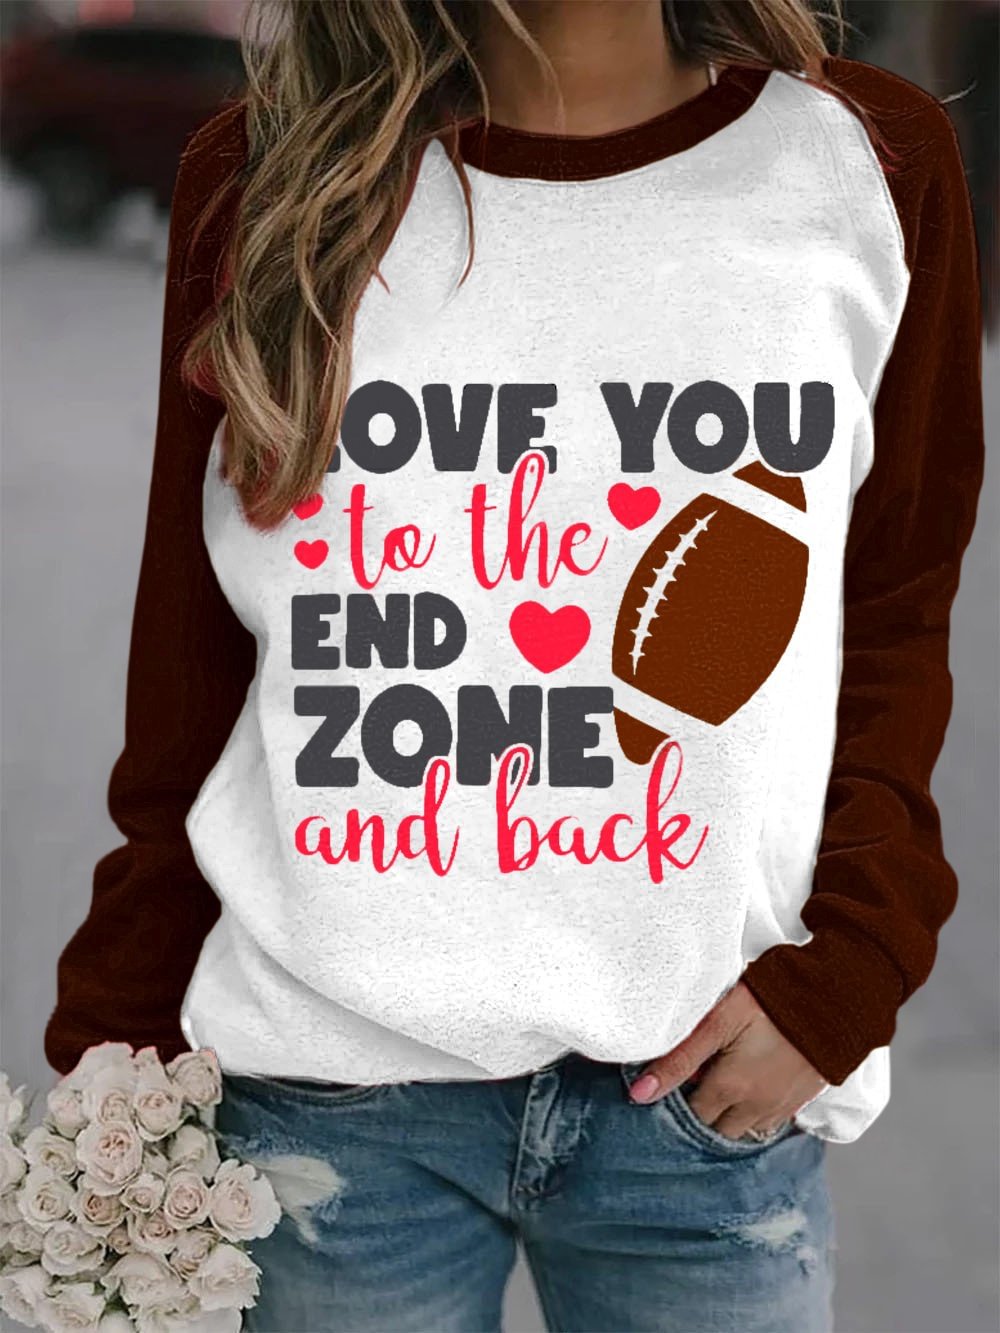 LOVE YOU TO THE END ZONE AND BACK Print Track Sweatshirt